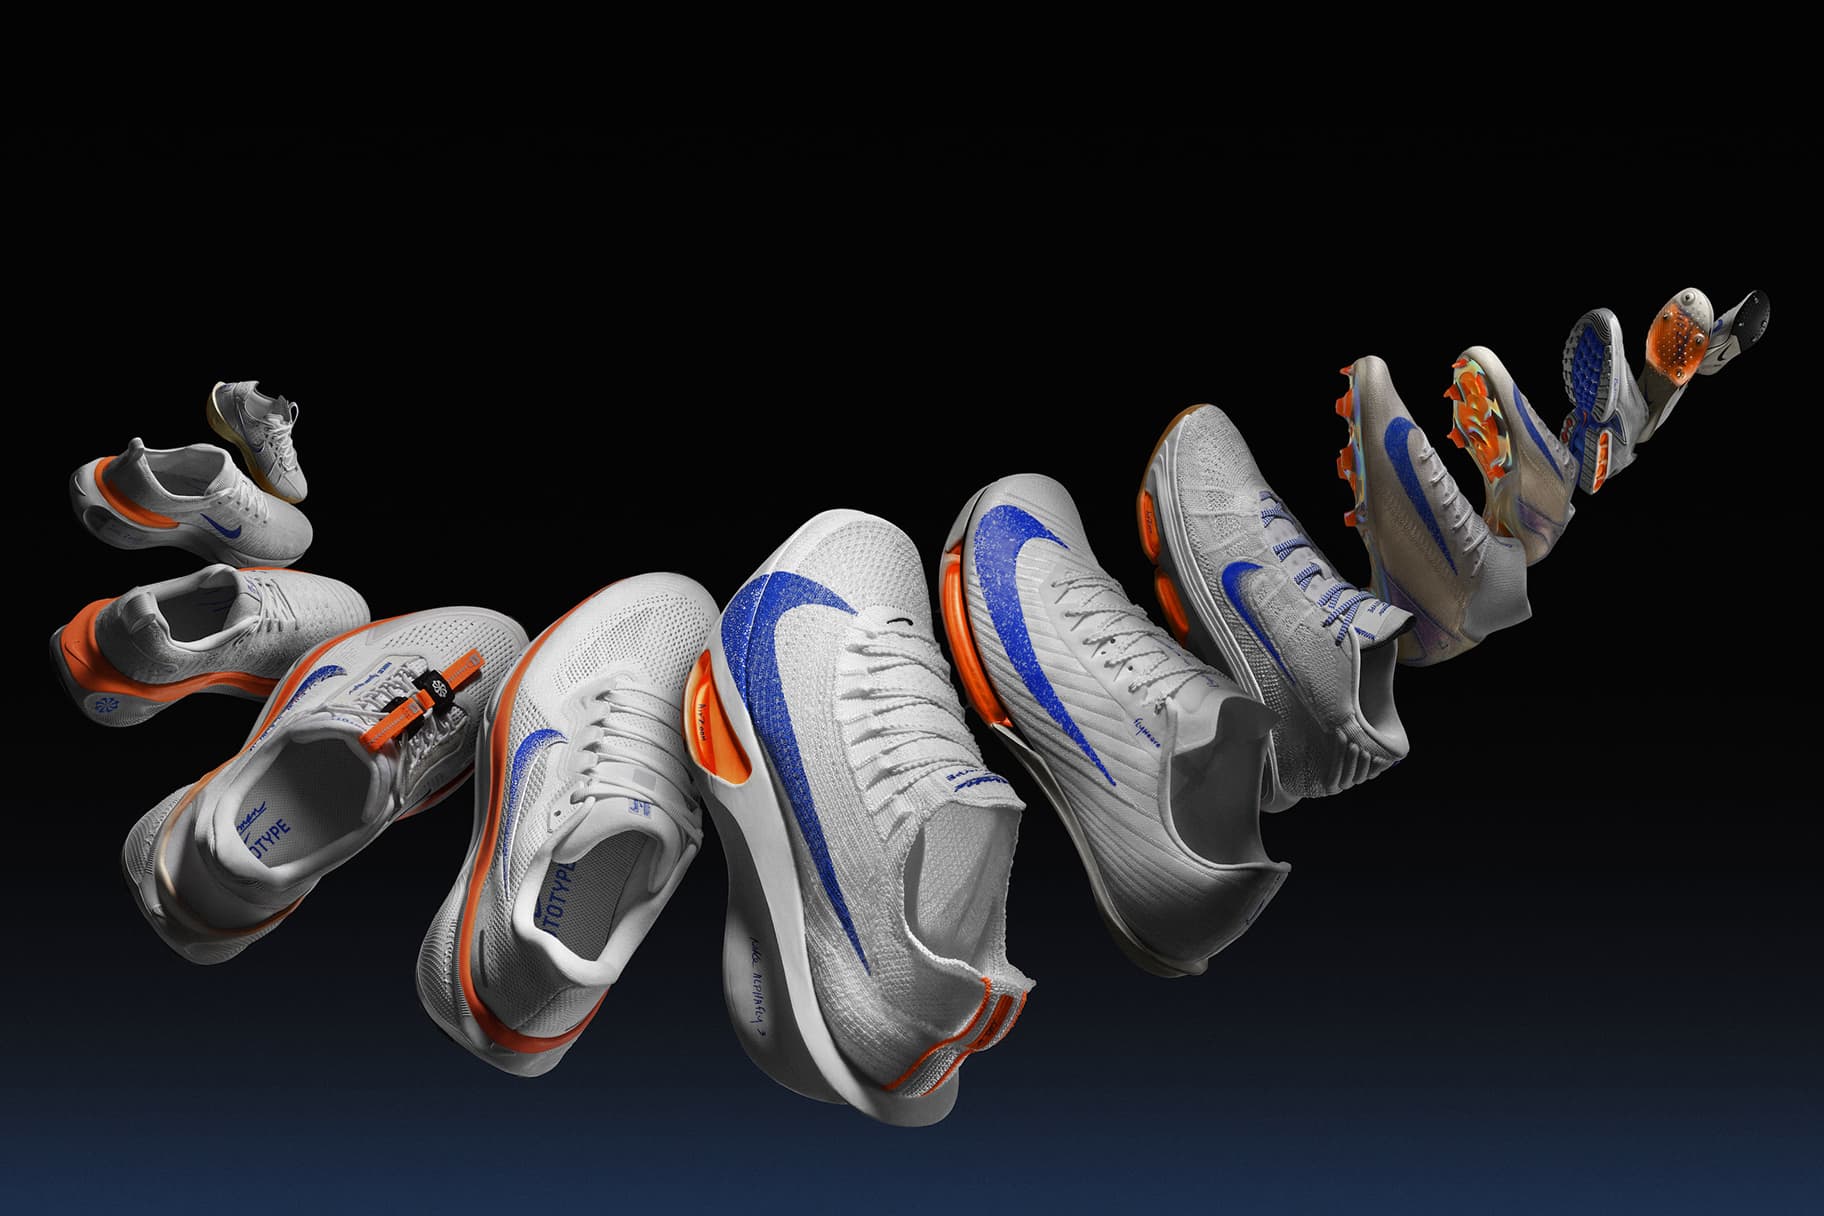 Nike's best Air-powered products on display in Blueprint Pack